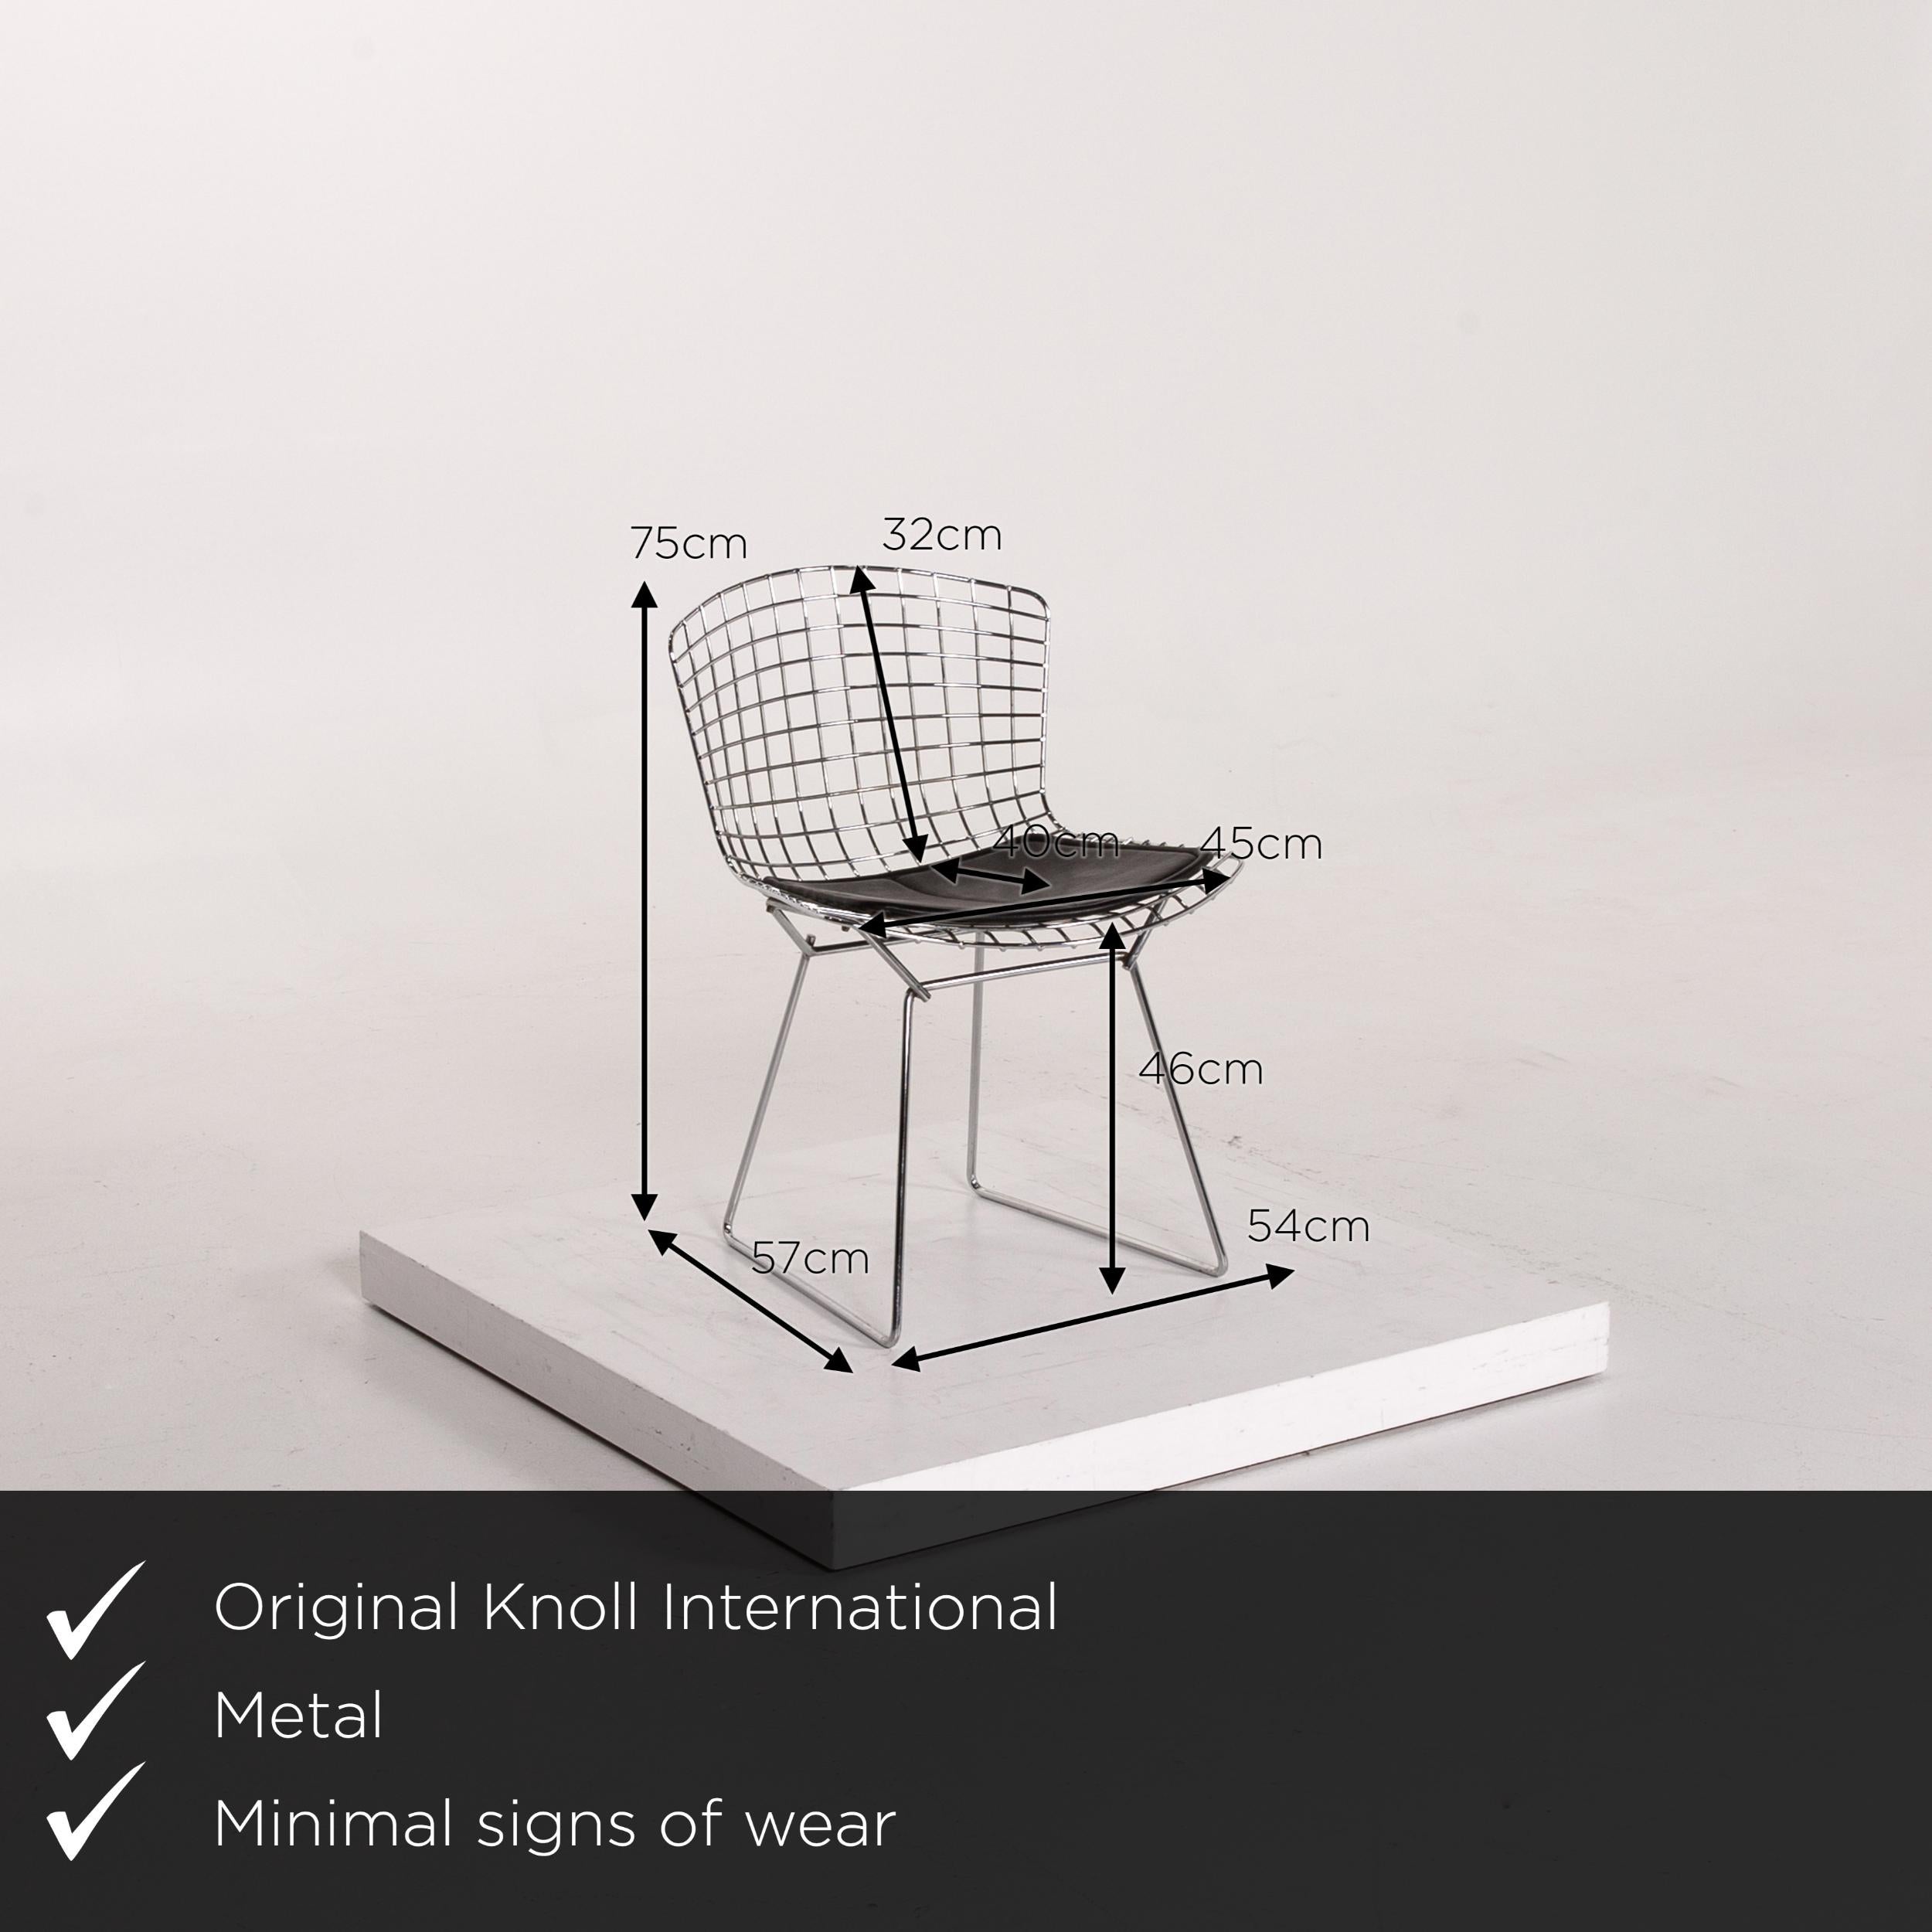 We present to you a Knoll International Bertoia side chair metal chair armchair.

Product measurements in centimeters:

Depth 57
Width 54
Height 75
Seat height 46
Seat depth 40
Seat width 45
Back height 32.
 
 

  